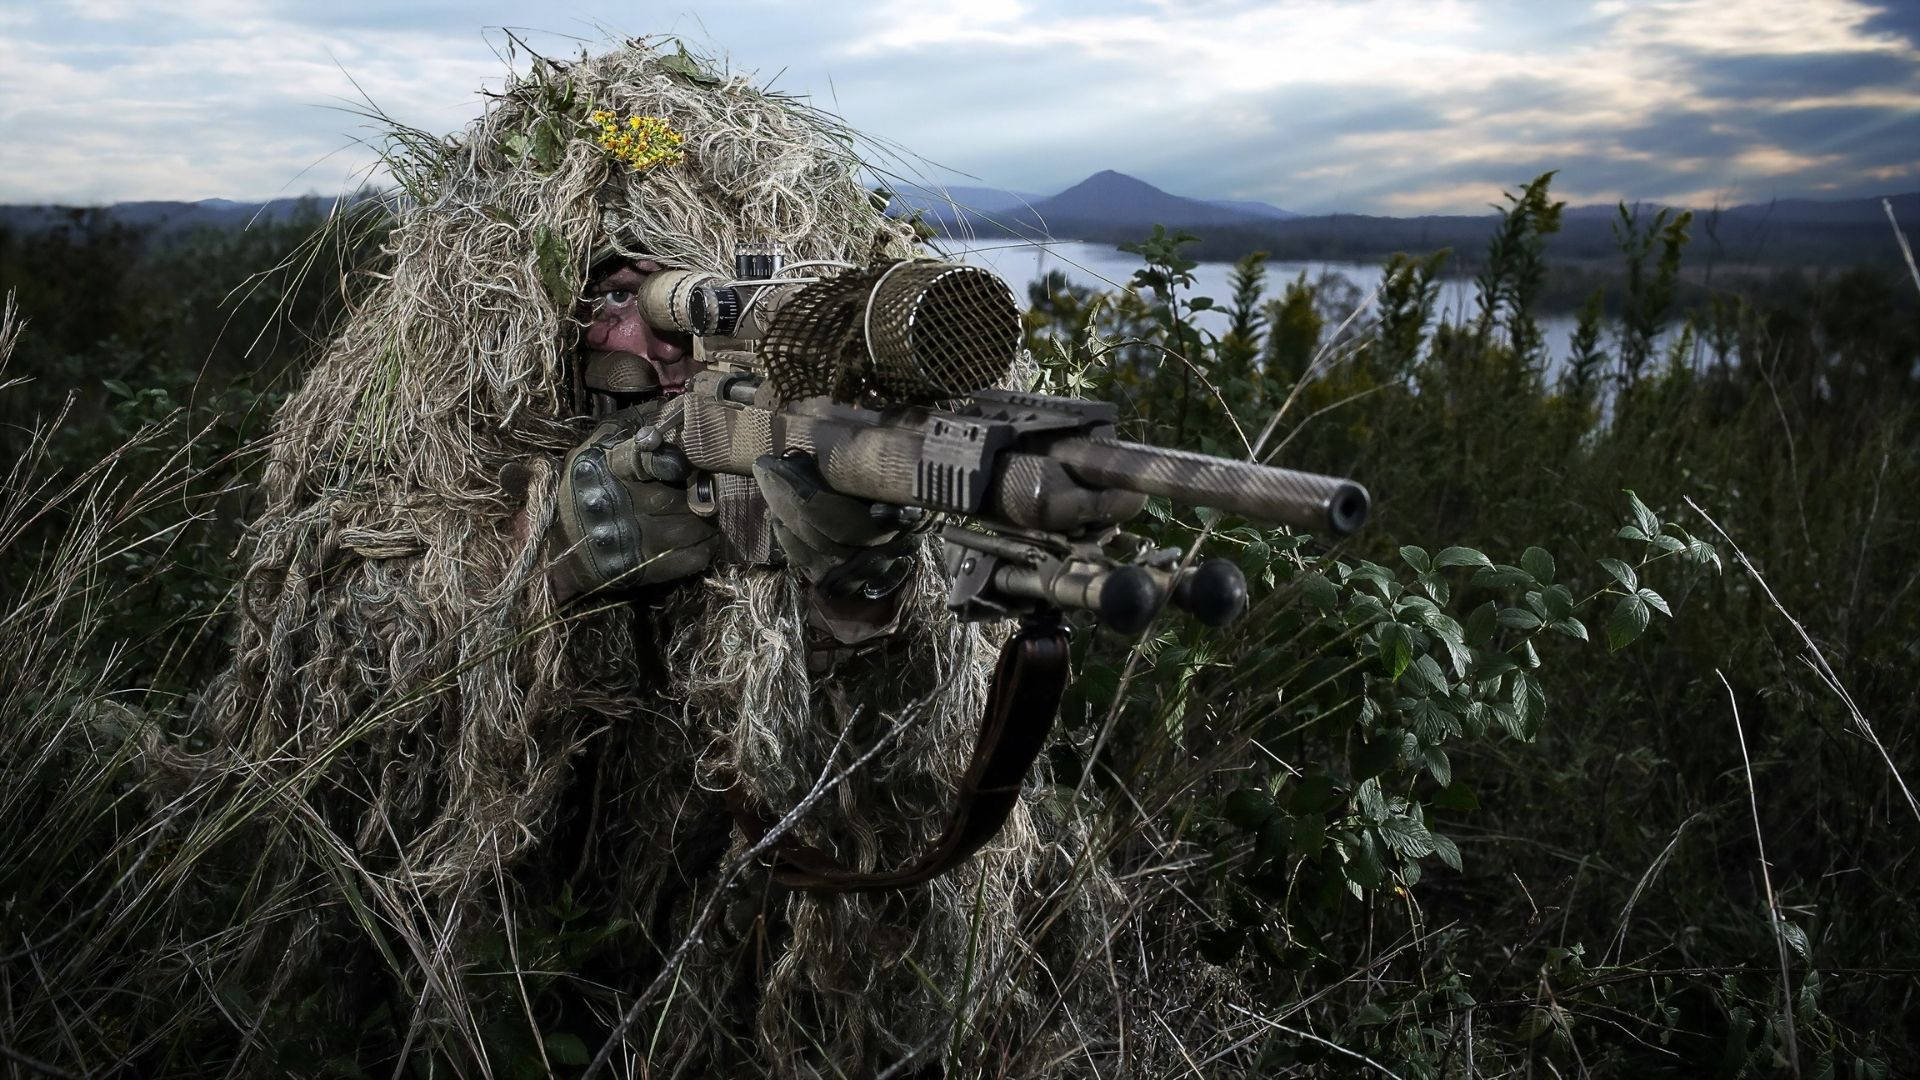 Full Camo Soldier Holding A Sniper Wallpaper